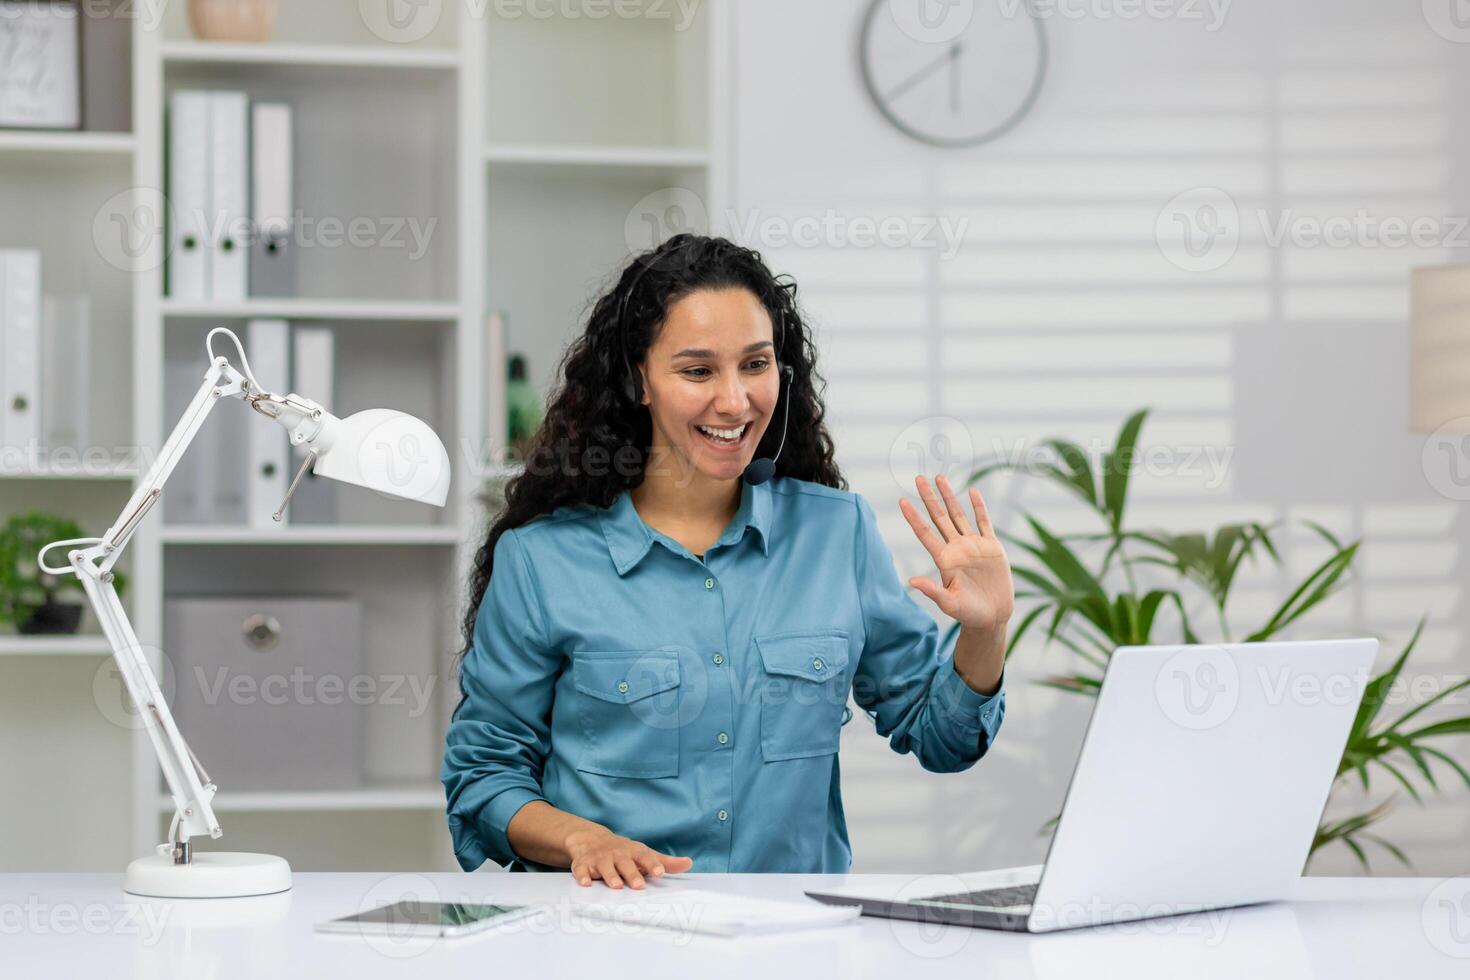 Friendly businesswoman in a smart blue shirt, waving and smiling during a virtual meeting in a well-lit office setting, showcasing effective remote work communication. photo